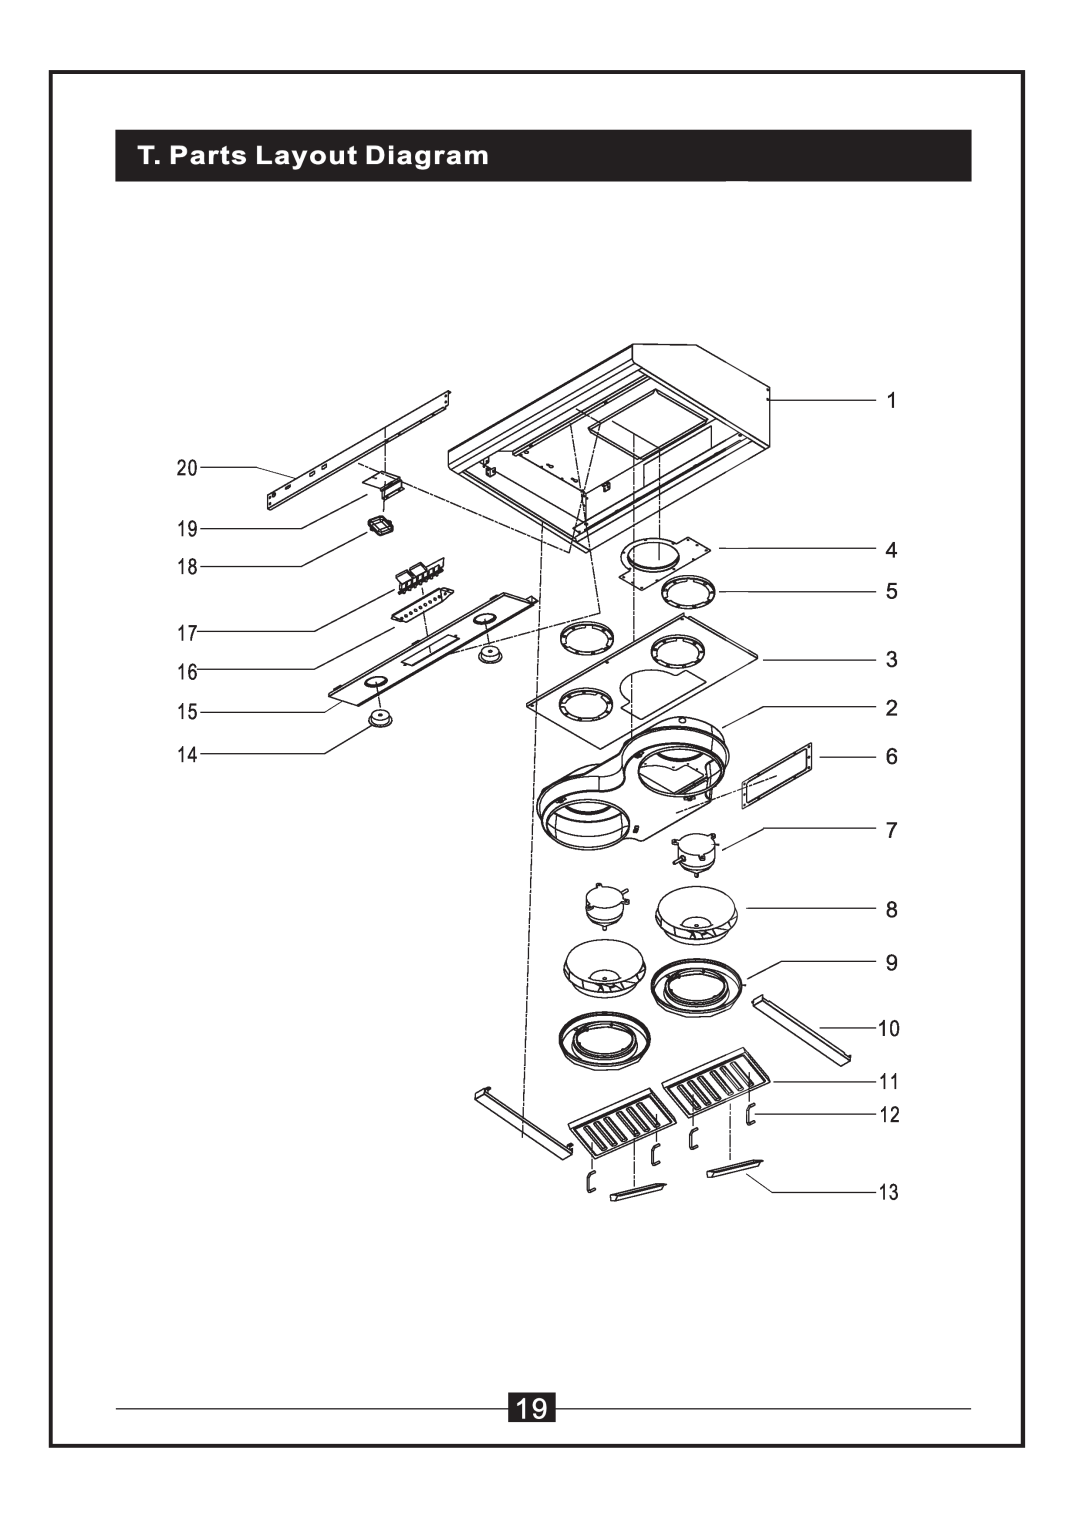 Windster WS-38 manual T. Parts Layout Diagram 